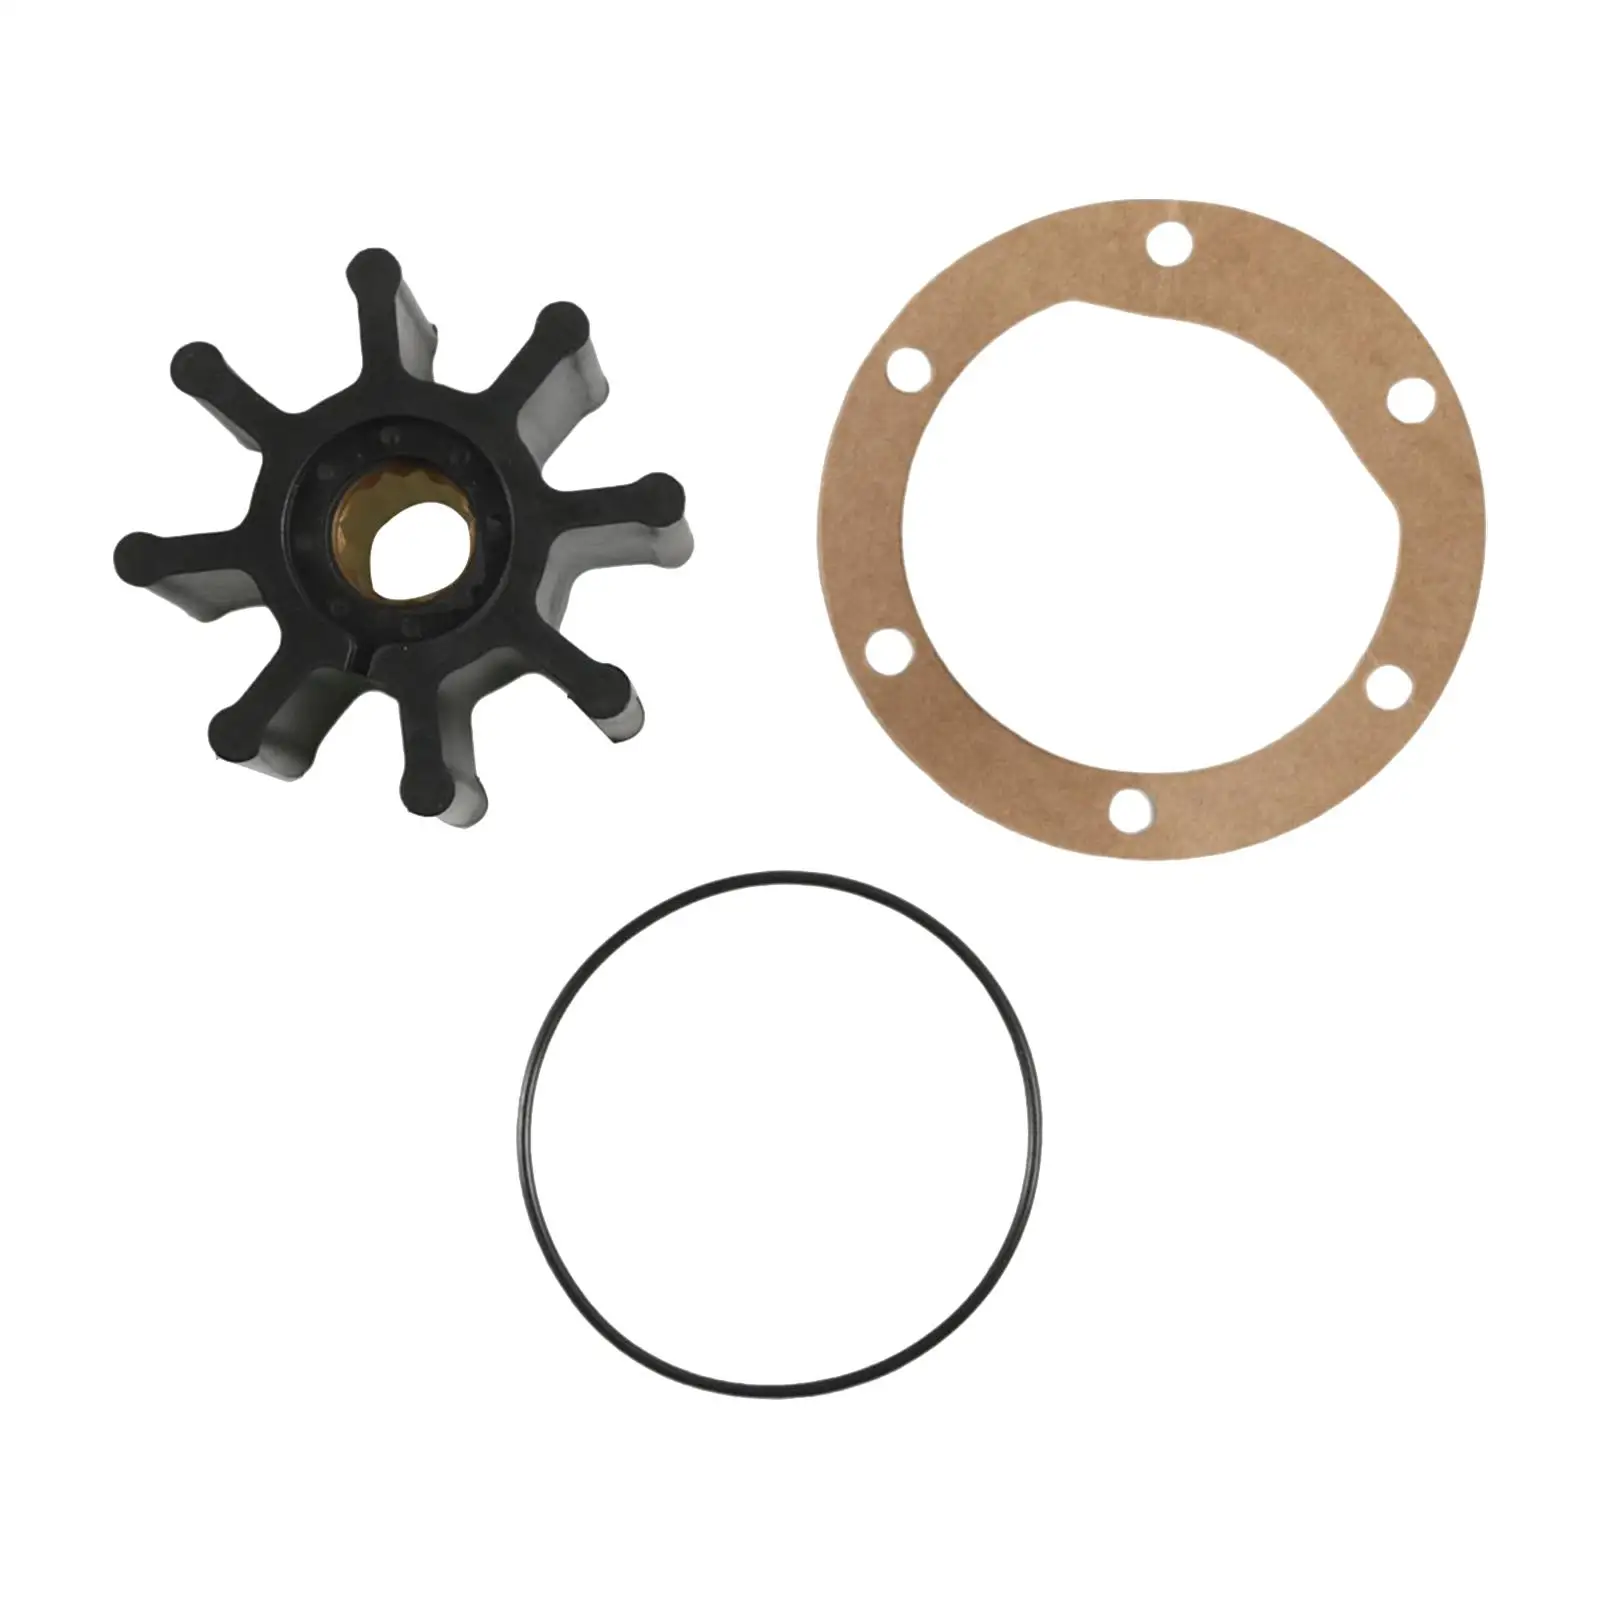 875593-6 877061 3841697 21951356 Spare Parts Easy to Install Repair Parts Replaces Water Pump Impeller Kit for